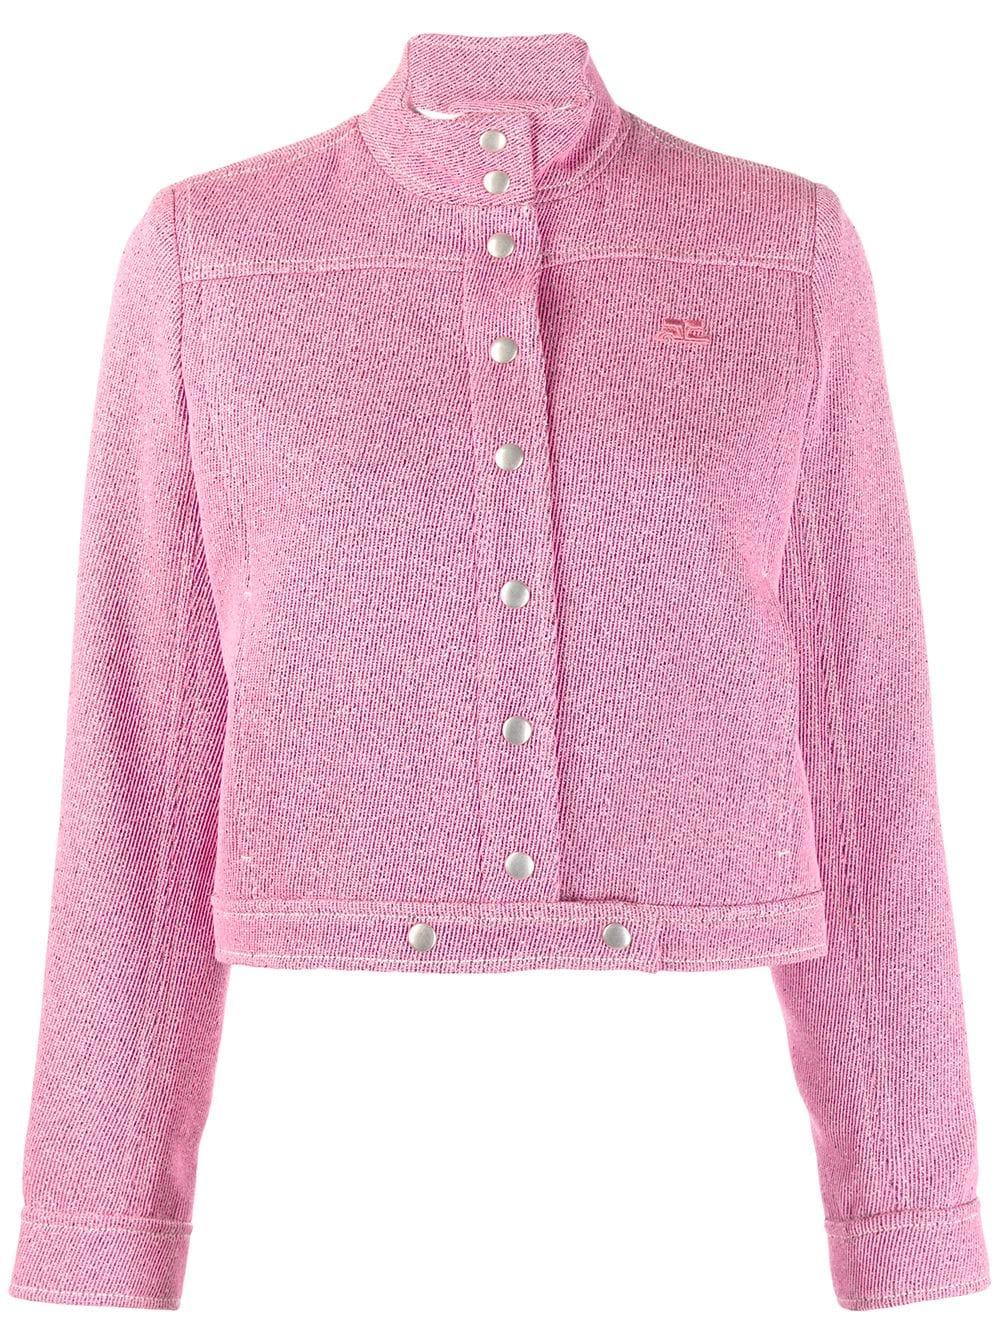 Courreges Cropped Jacket in Pink - Lyst